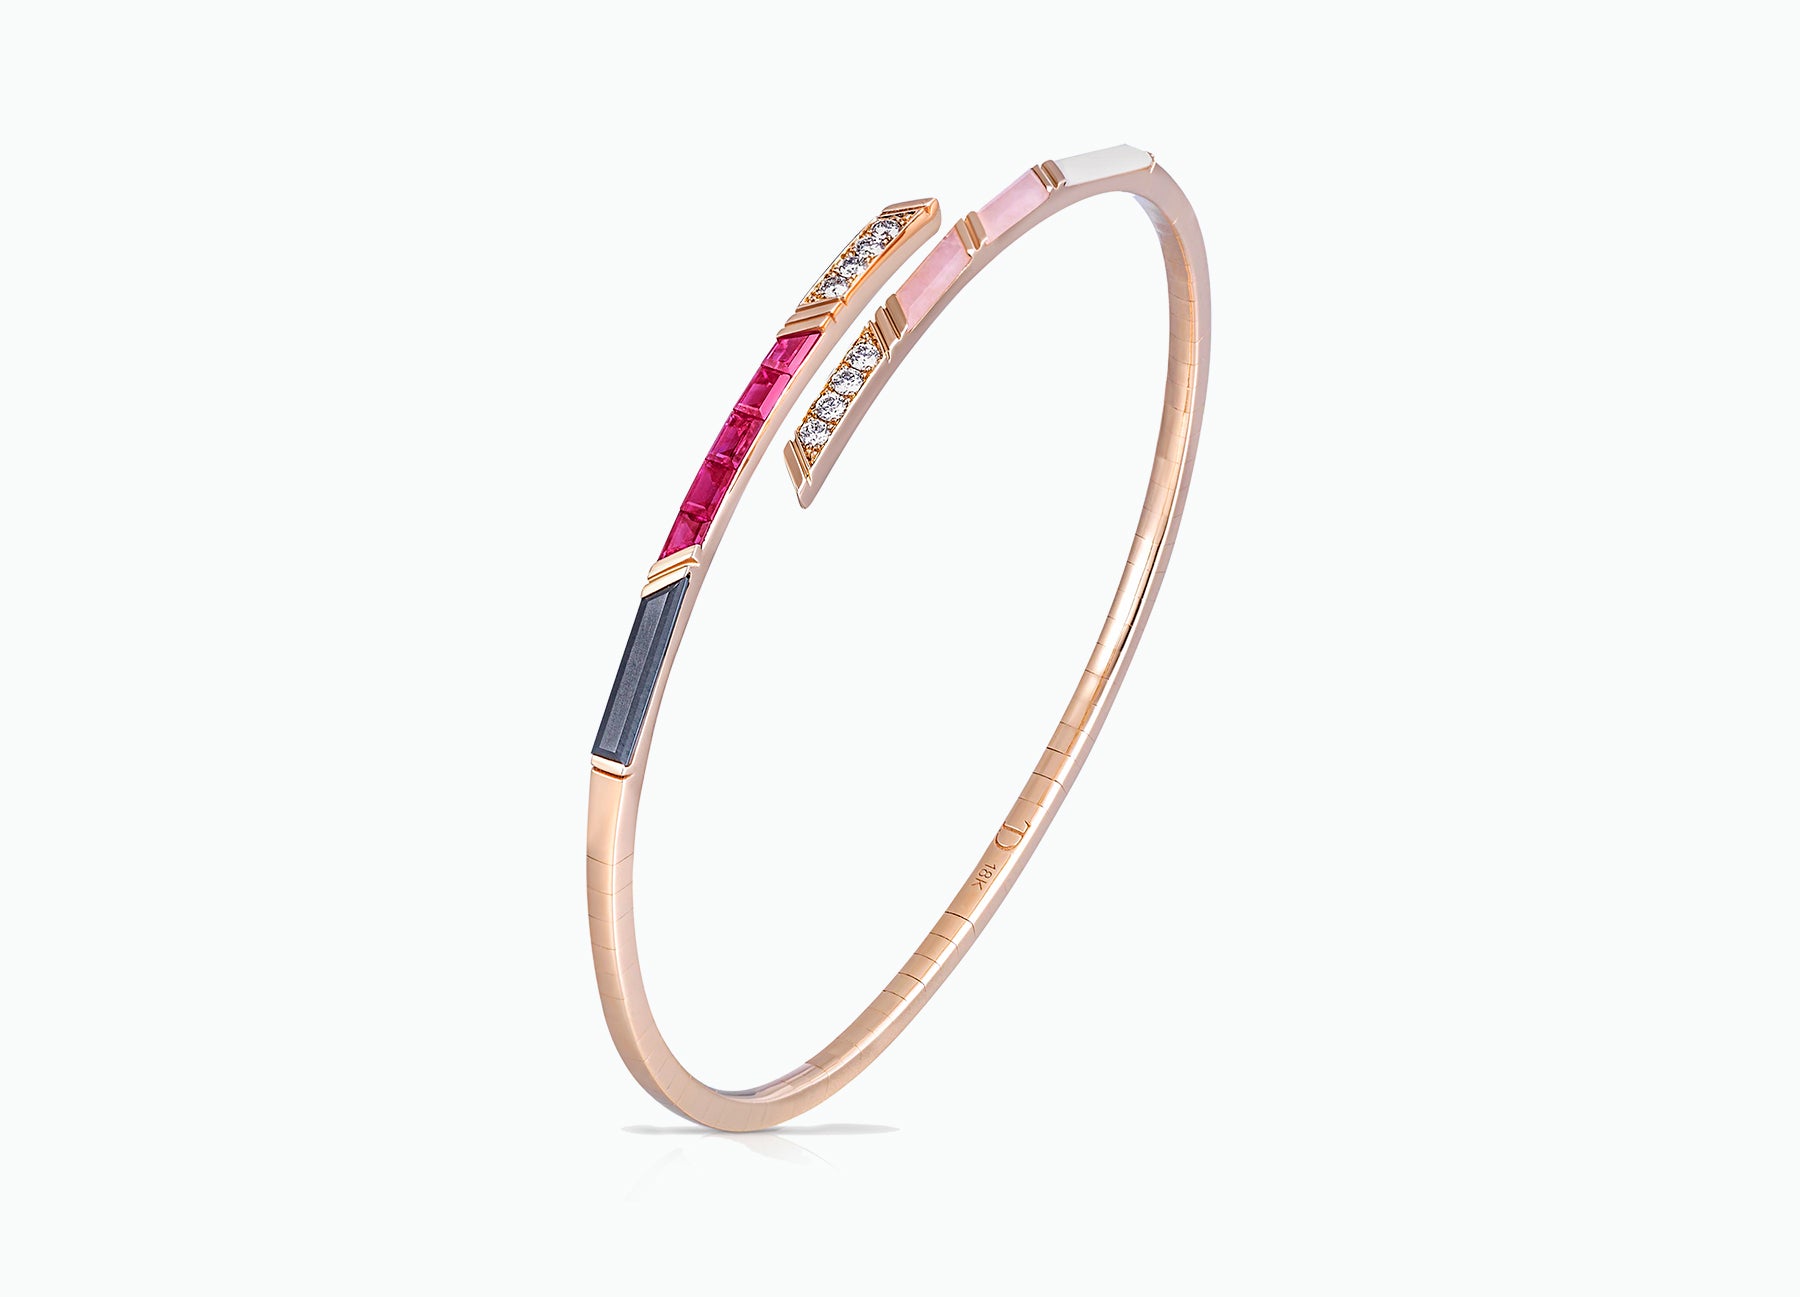 Ruby diamond and pink opal bangle in 18K rose gold by Tomasz Donocik Side View